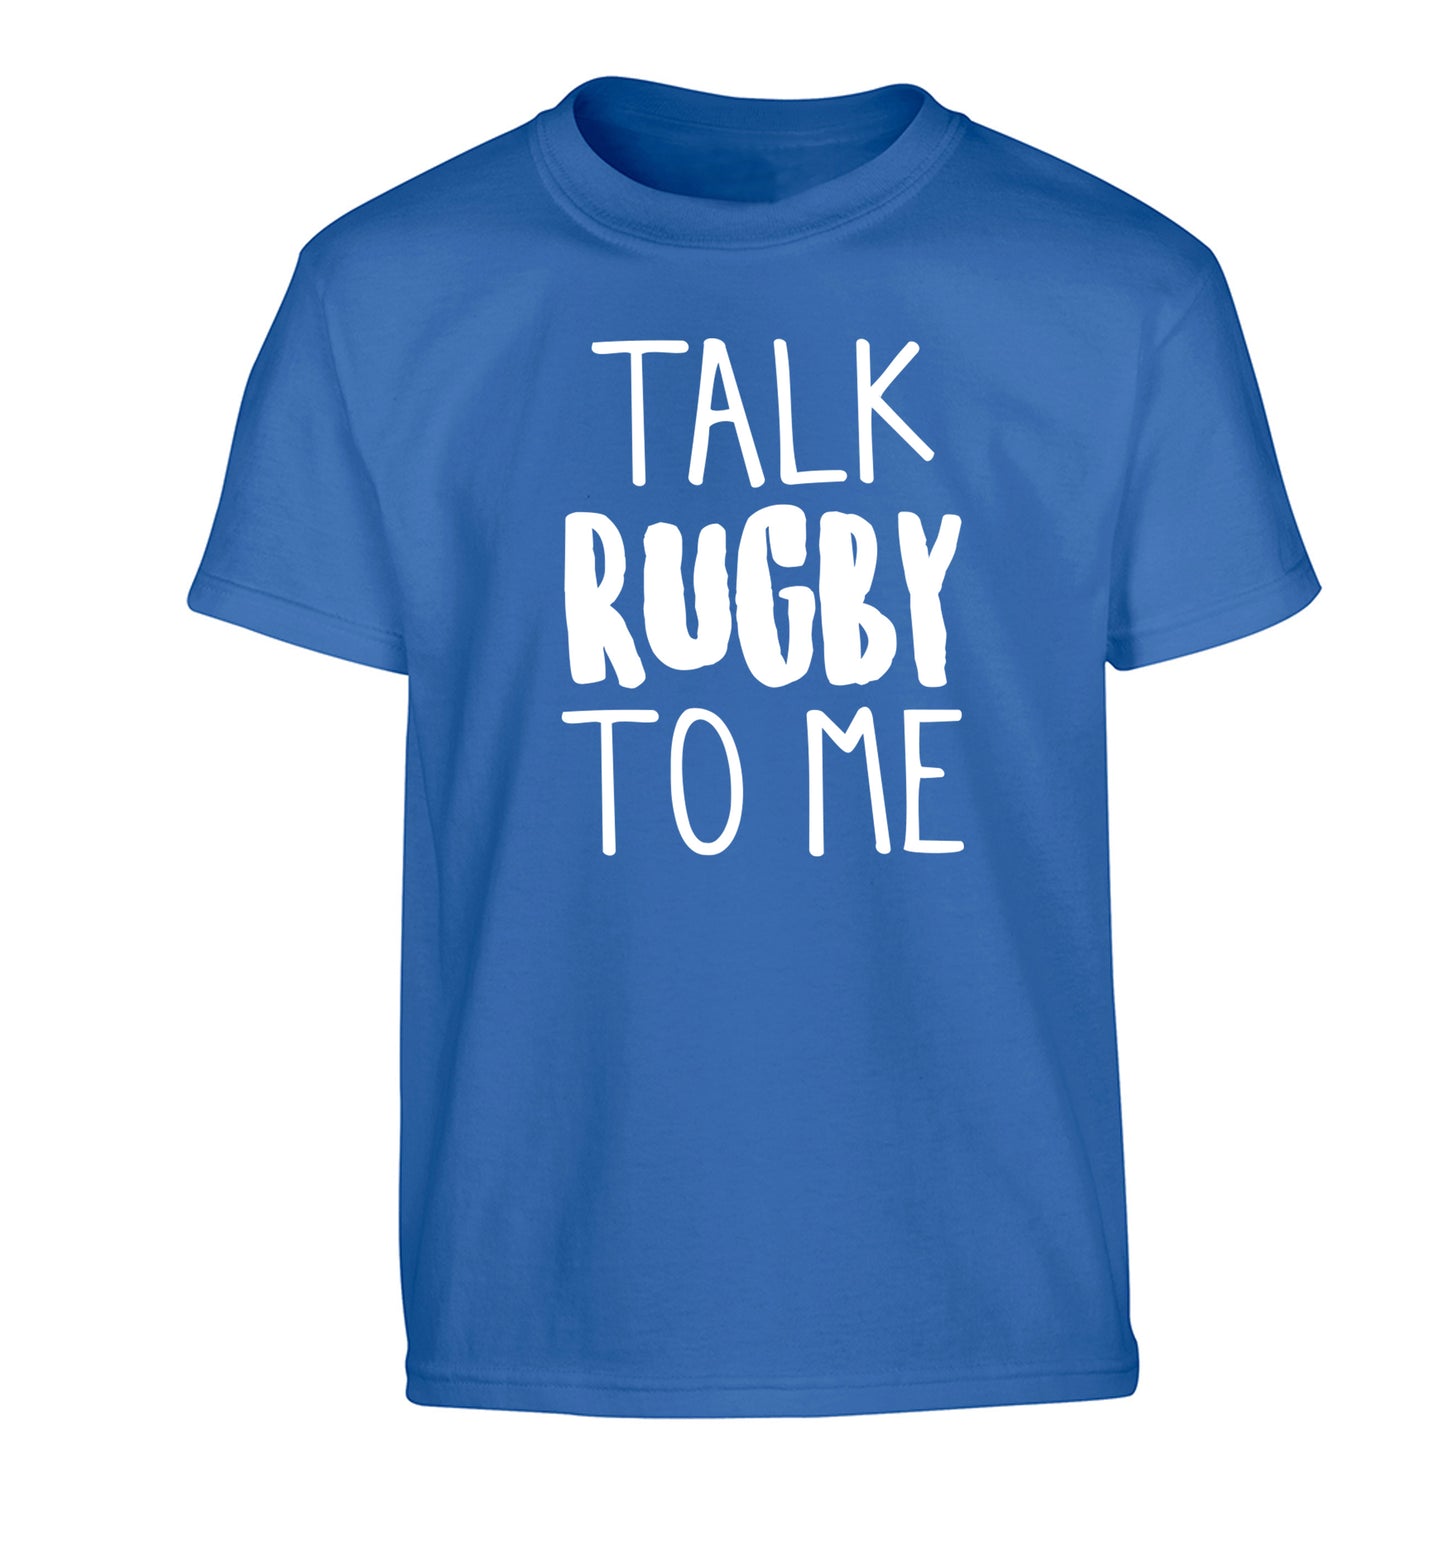 Talk rugby to me Children's blue Tshirt 12-13 Years